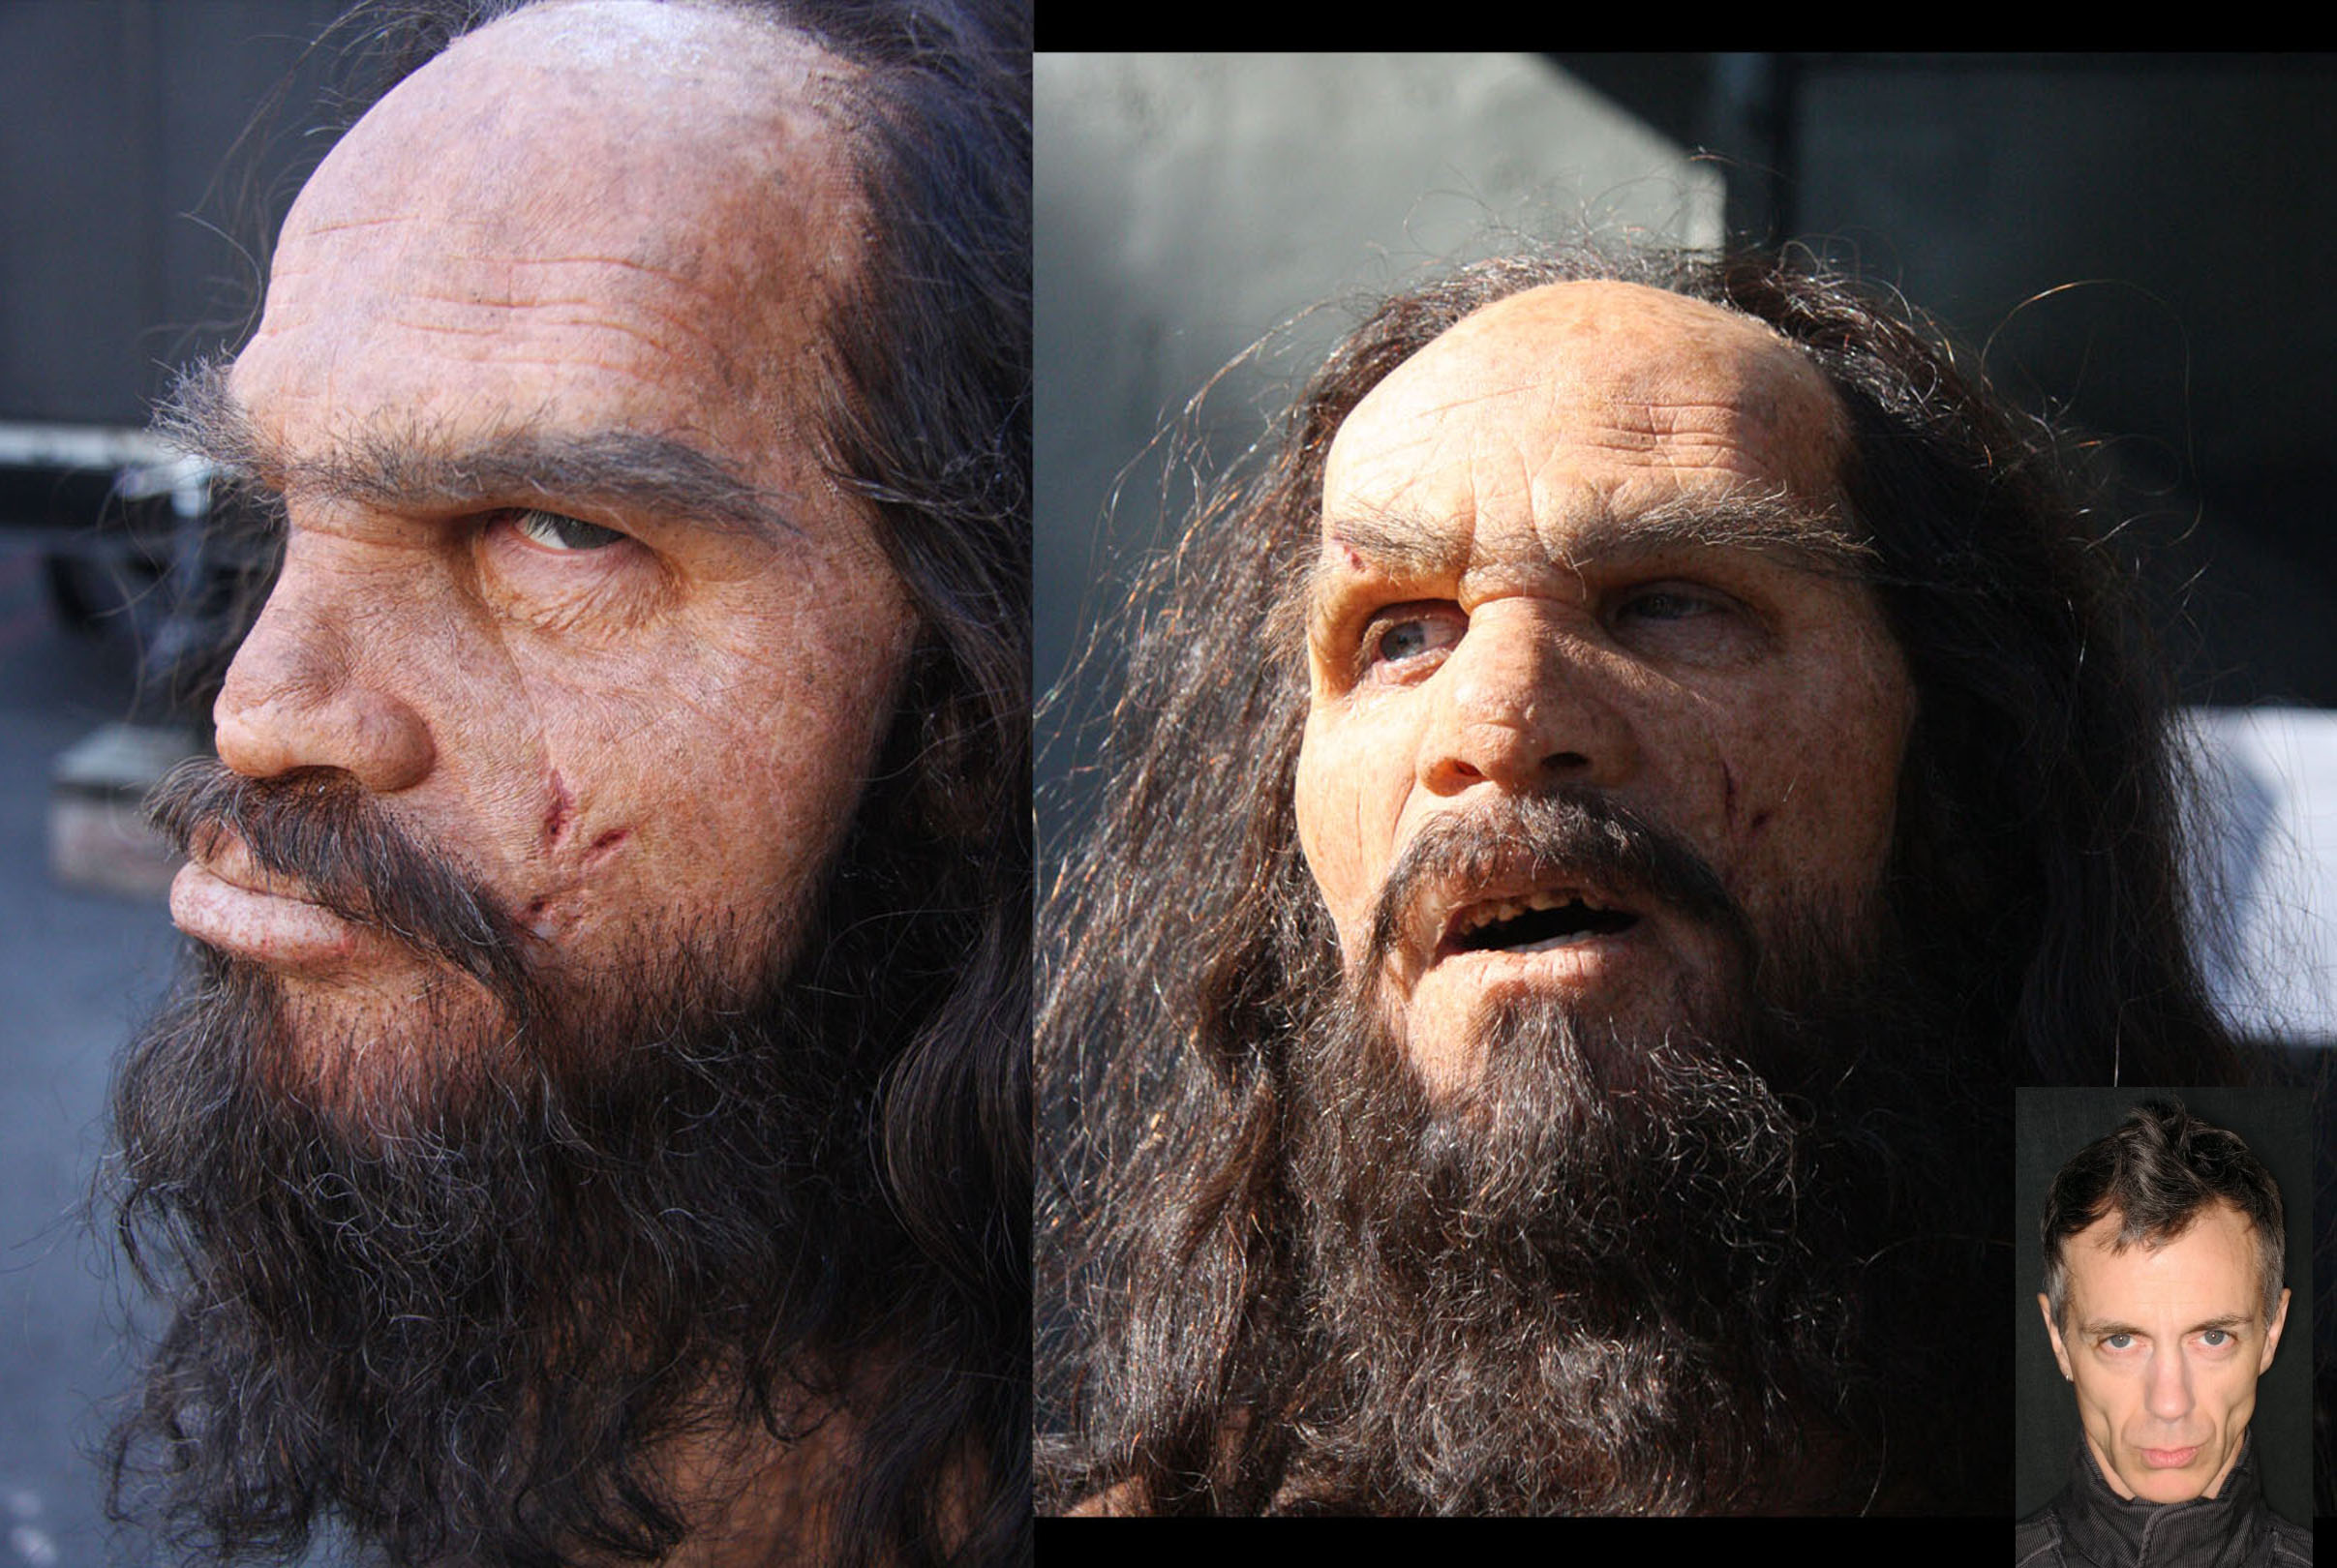 Caveman silicone make up for 'UFC' F/X network promo